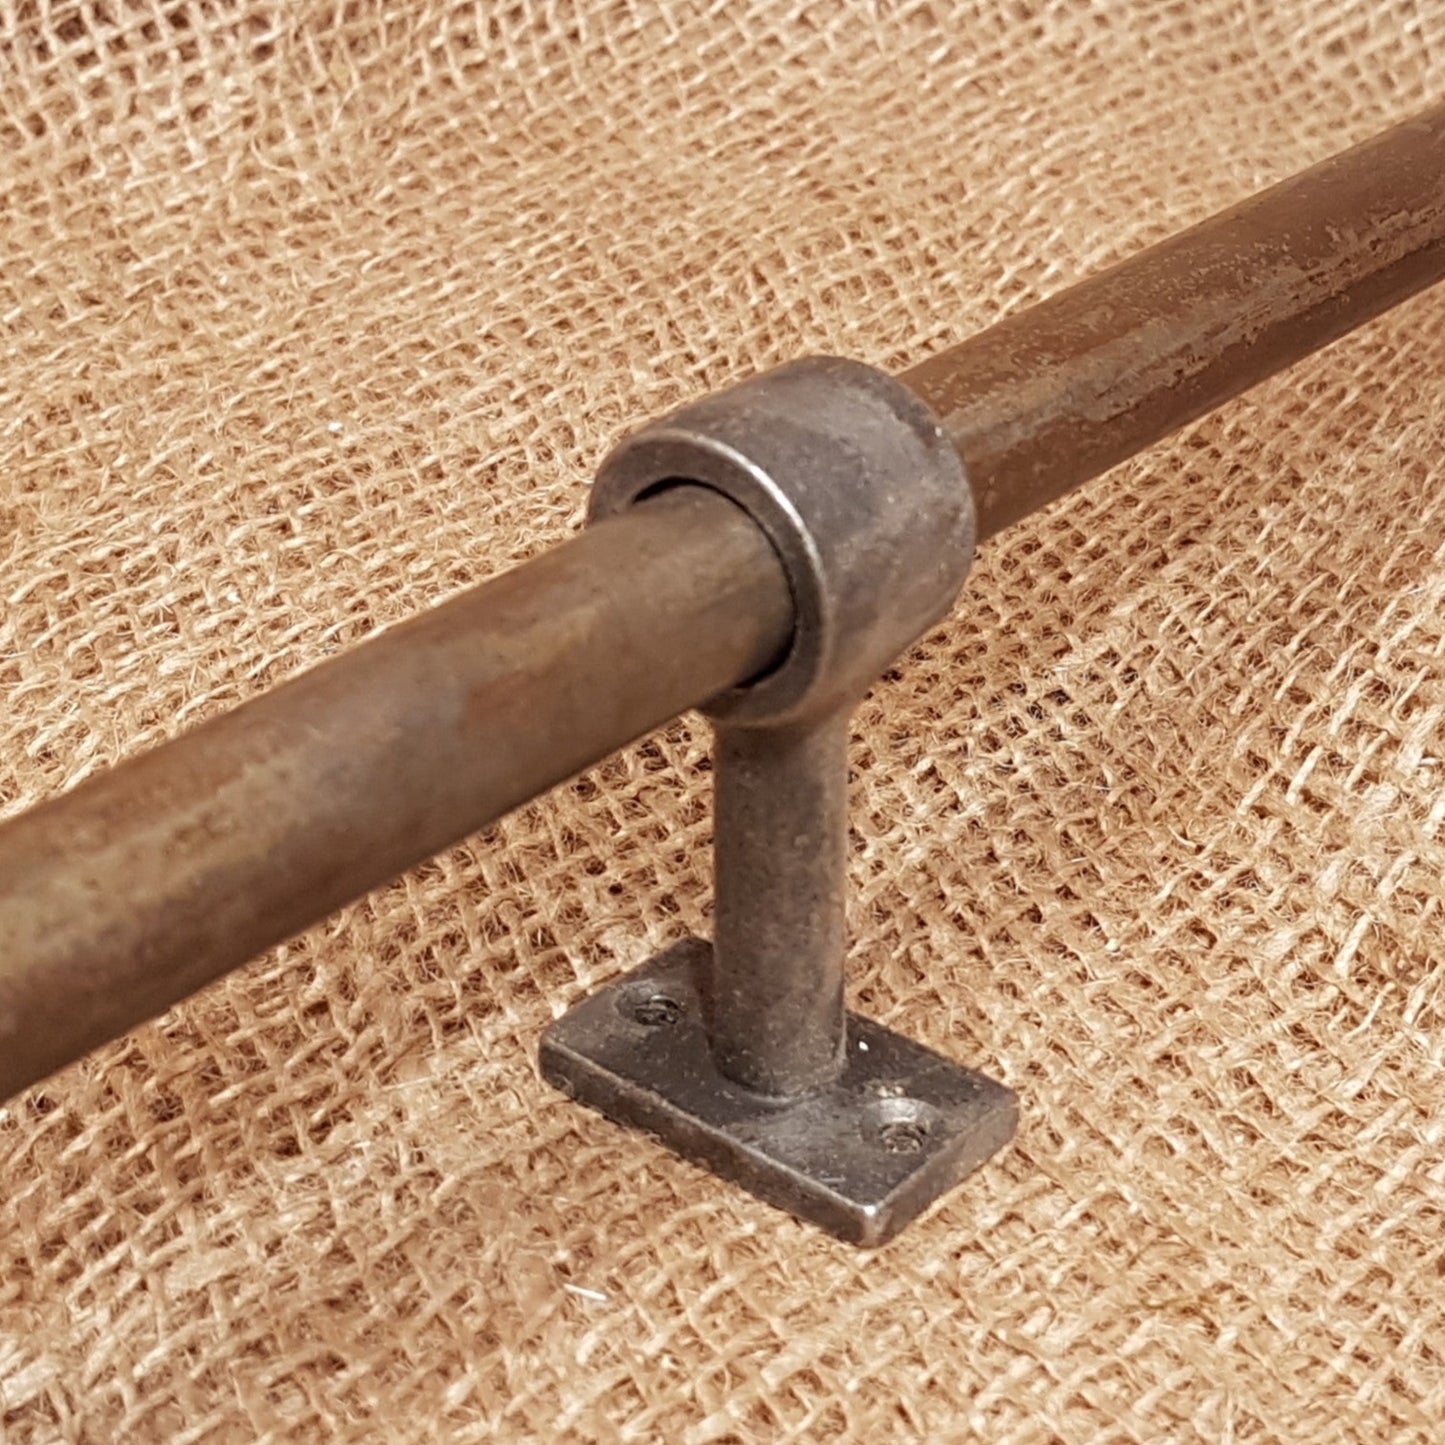 Rail / Rod / Axle - Support Rail 18" - Spearhead Collection - Rails & Rings - D.I.Y. - Do It Yourself Projects, DIY, Hardware, Industrial hardware, Millwork Hardware, Rods and Rails, Supports